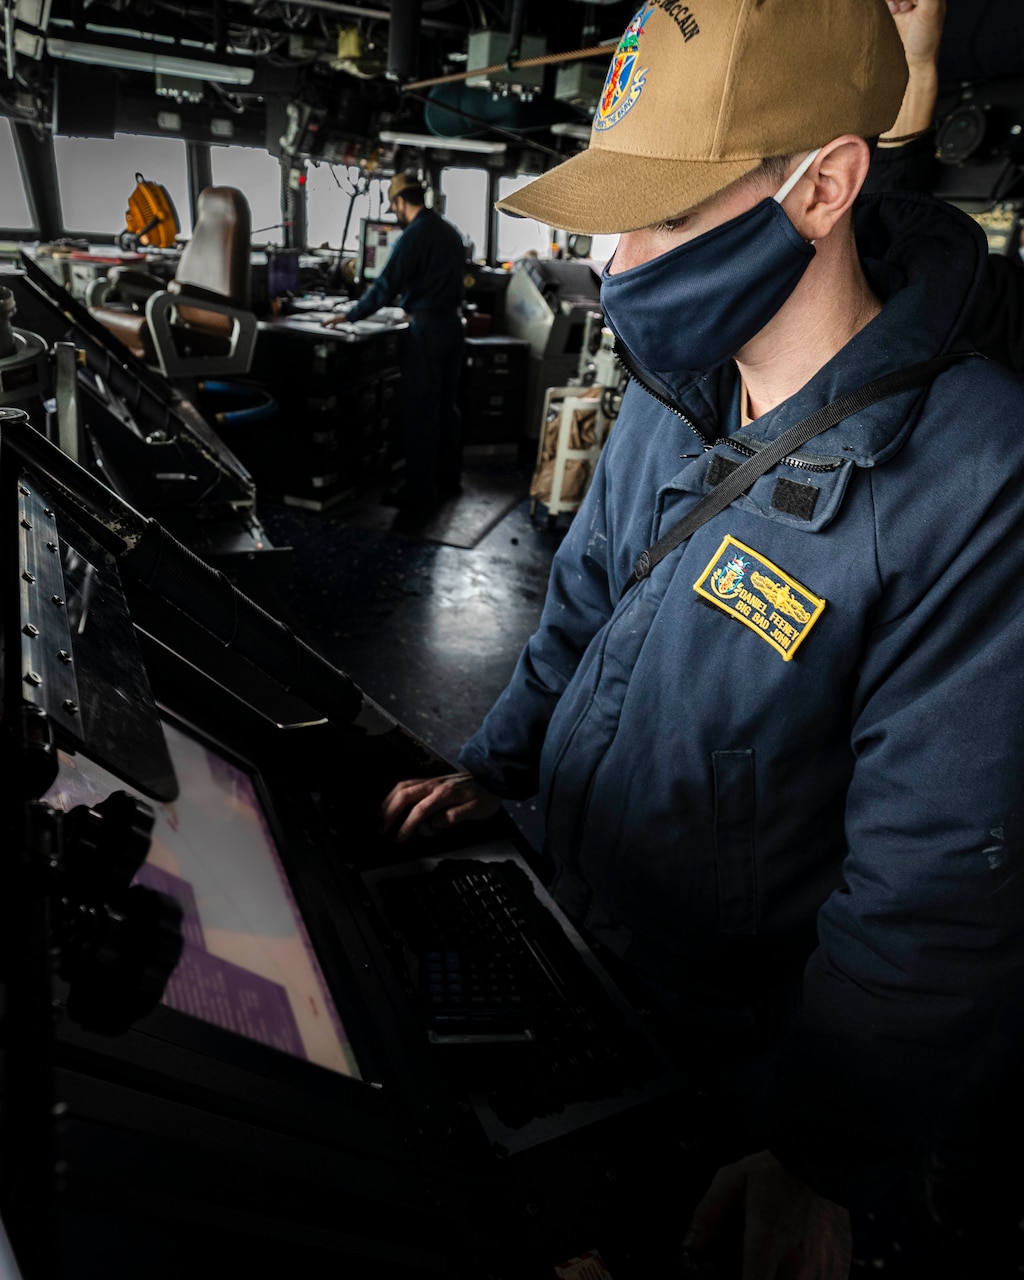 TAIWAN STRAIT (Dec. 30, 2020) Navigator Lt. j.g. Daniel Feeney, from Old Greenwich, monitors the ship’s course on the voyage management system (VMS) while standing watch in the pilot house as the guided-missile destroyer USS John S. McCain (DDG 56) conducts routine underway operations in support of stability and security for a free and open Indo-Pacific.